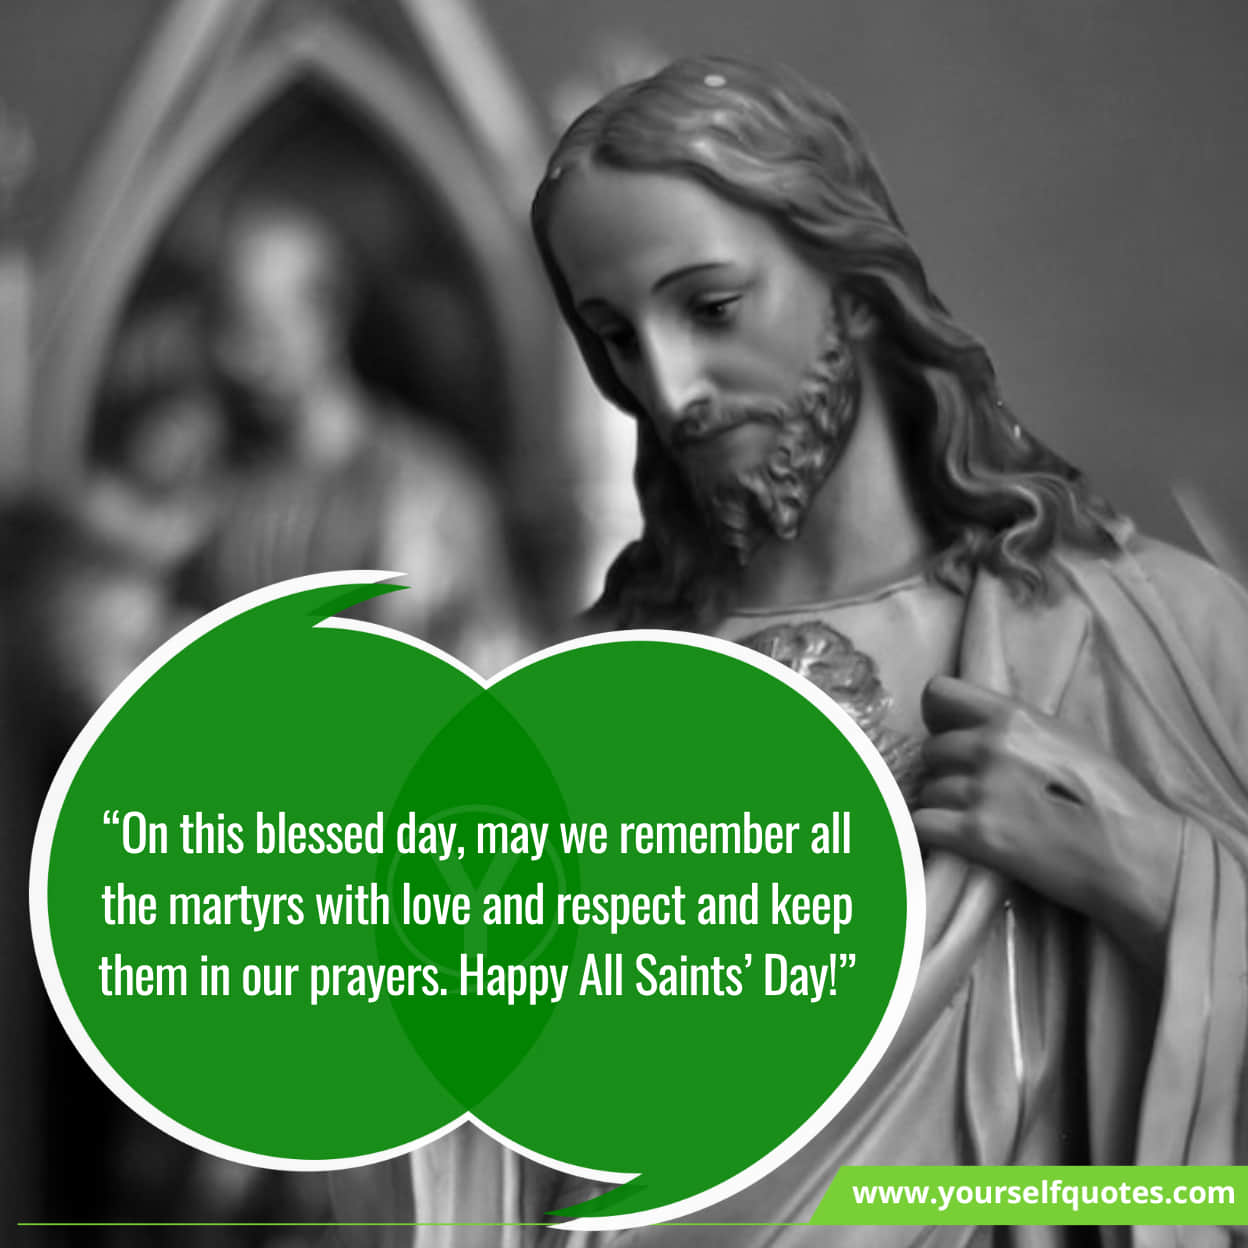 Happy All Saints Day Quotes, Wishes For Family & Friends